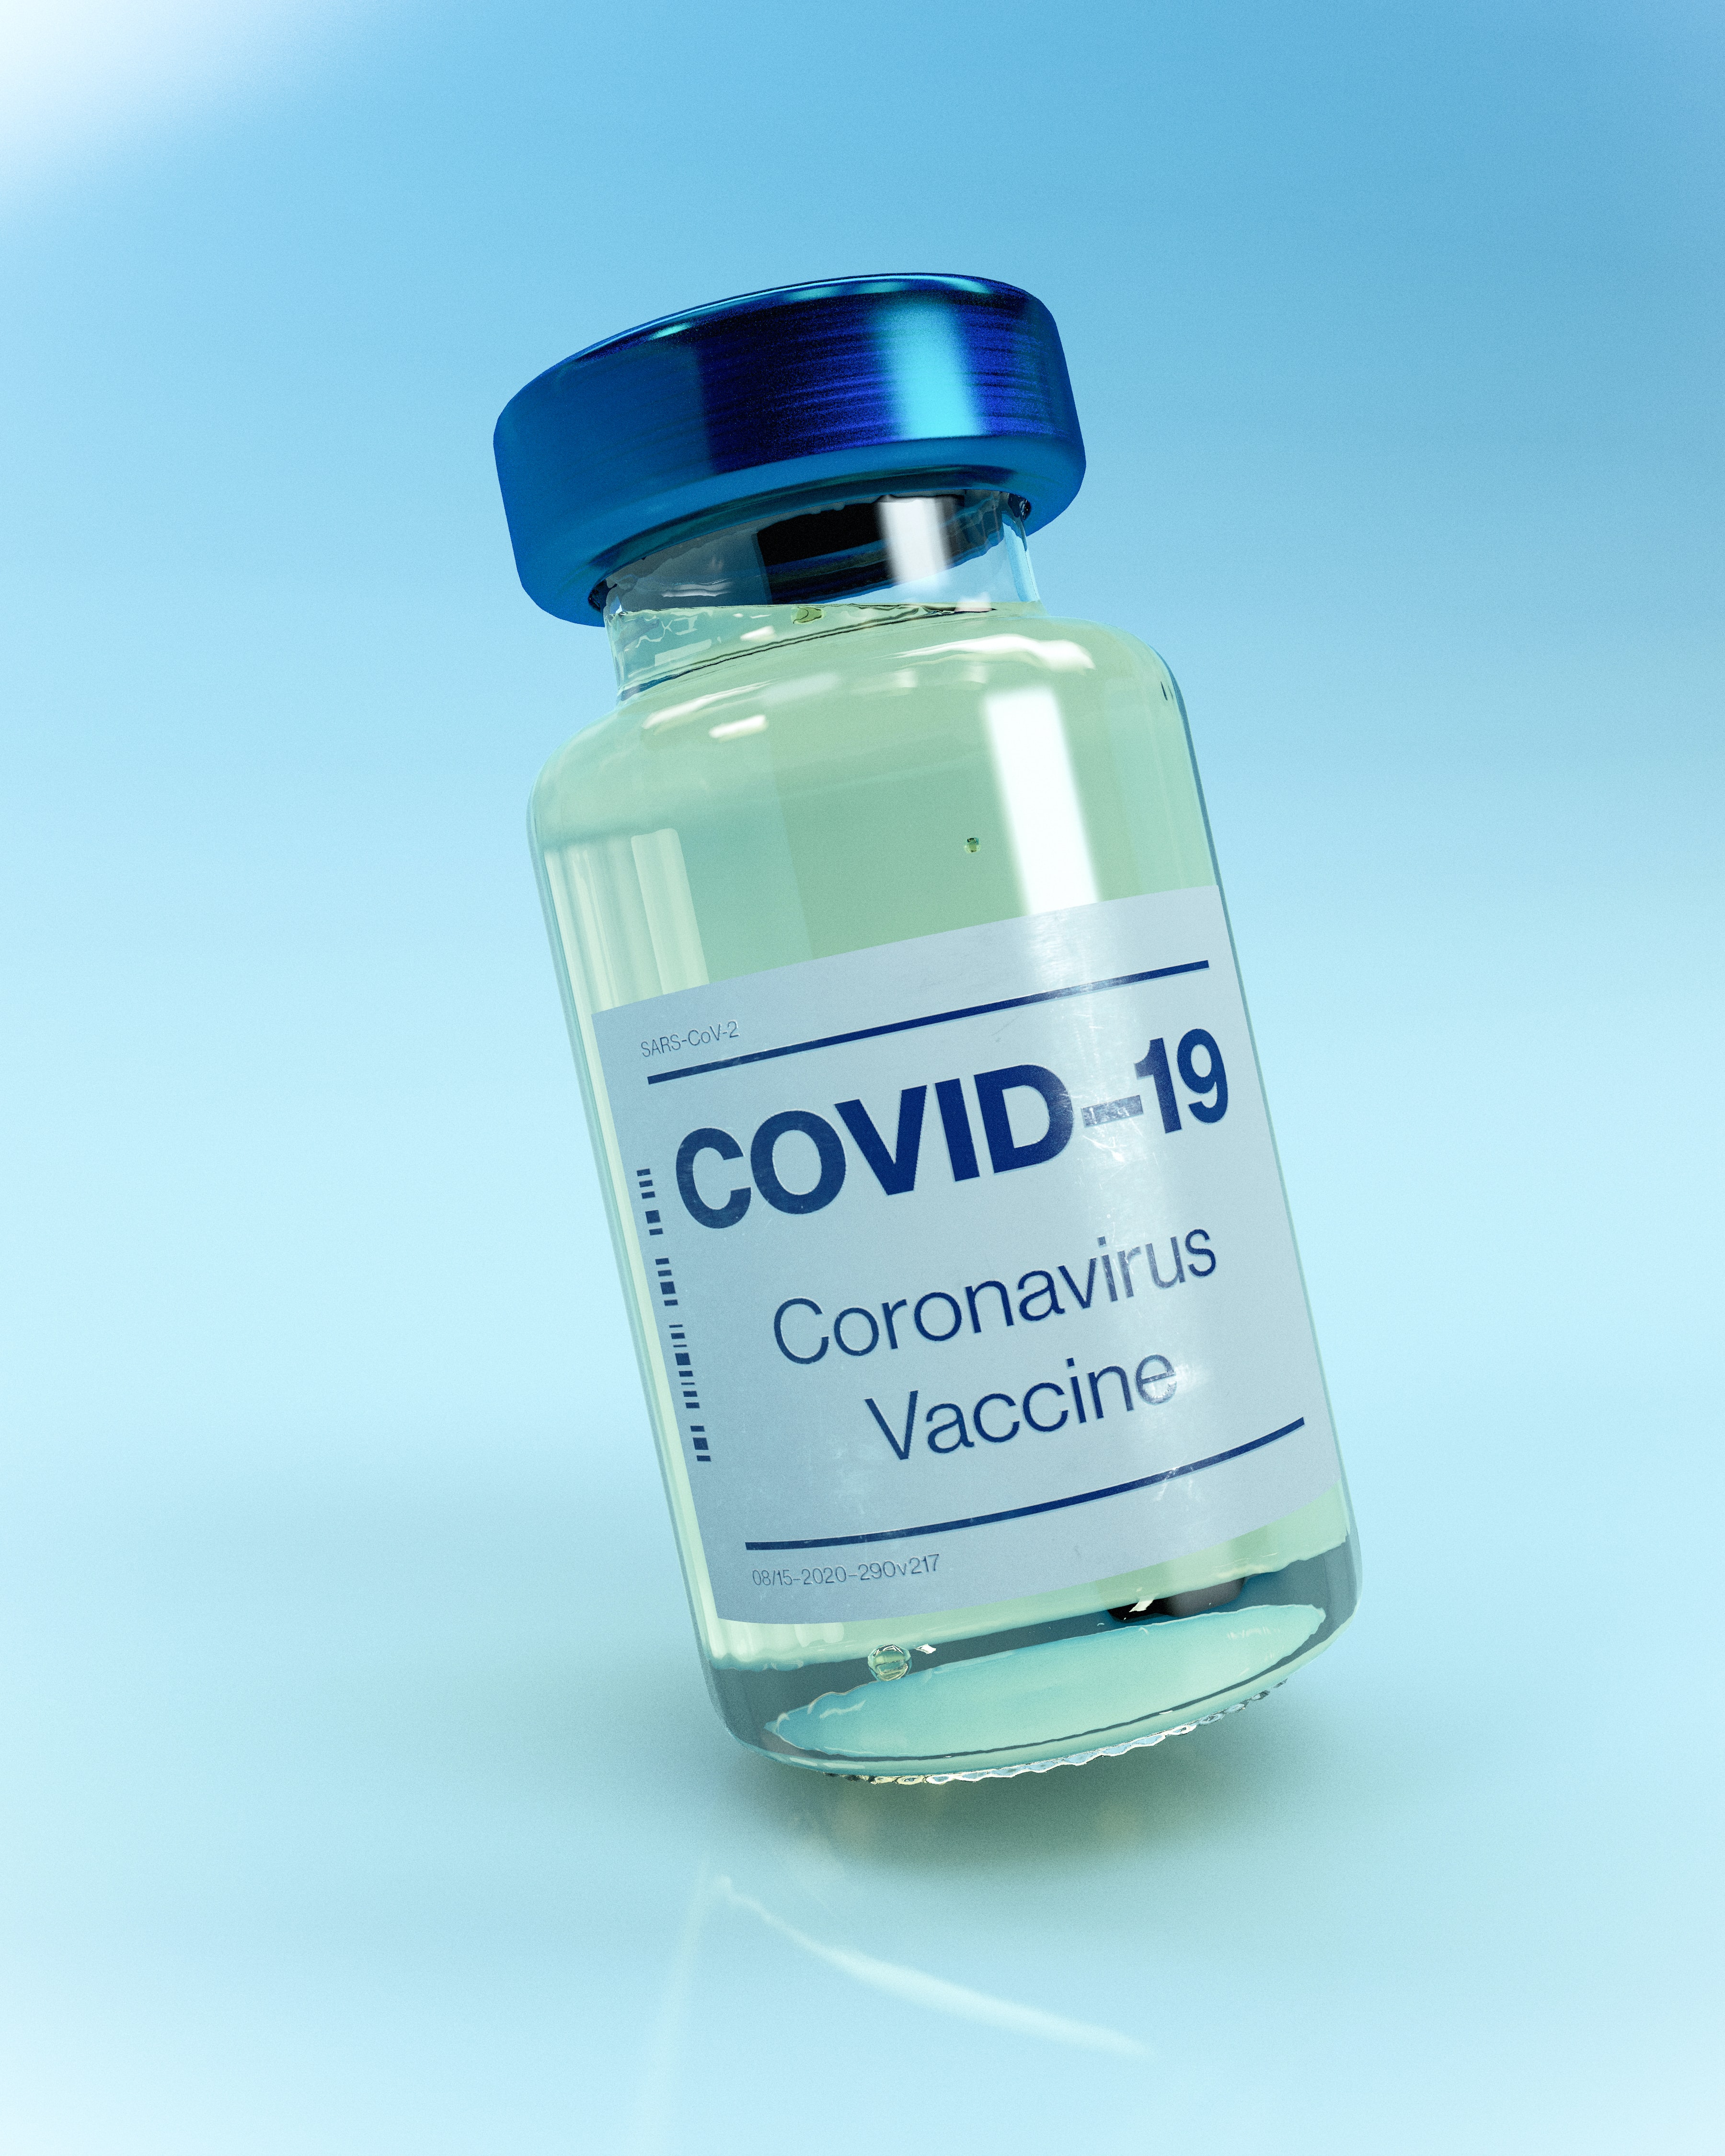 BREAKING: Moderna Says U.K. deal Will supply COVID-19 Vaccine from March